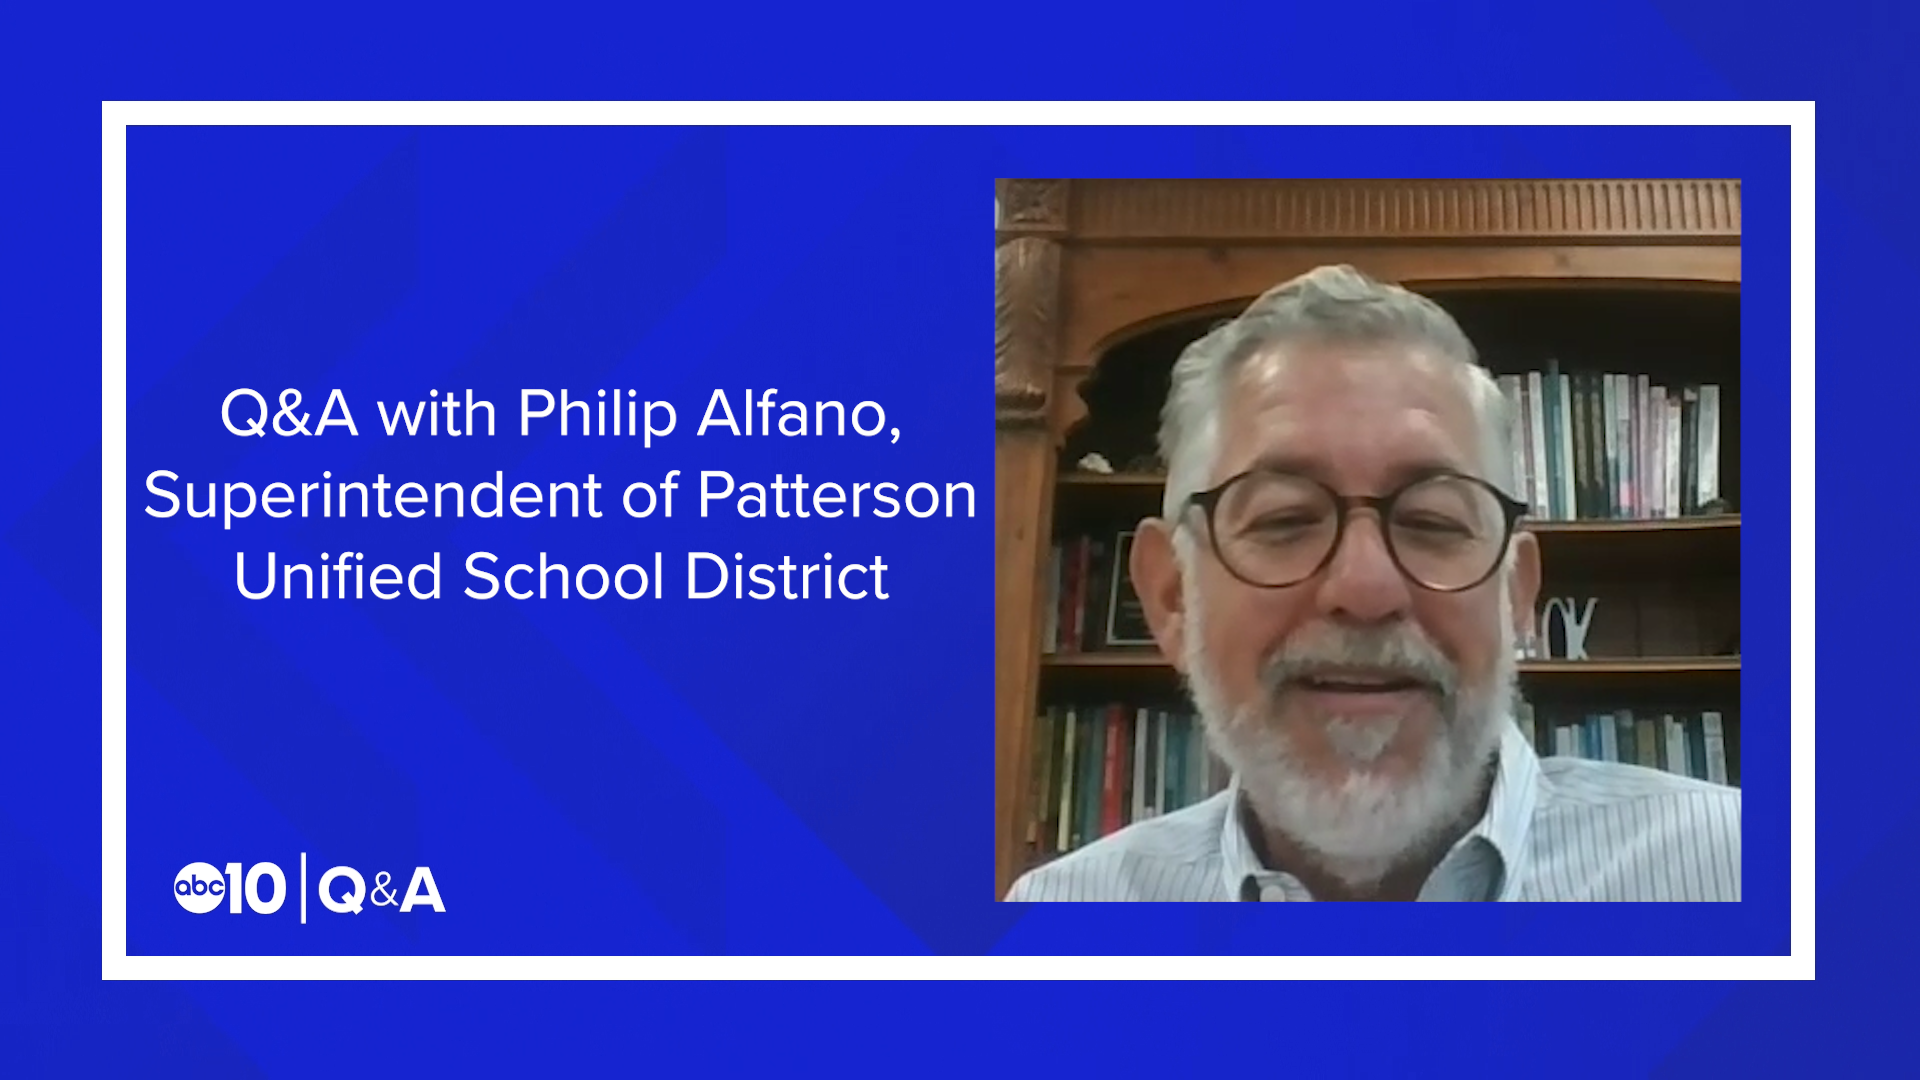 Patterson schools will be pushed back at least a month due to coronavirus surges in Stanislaus County. Superintendent Philip Alfano explains the big move.